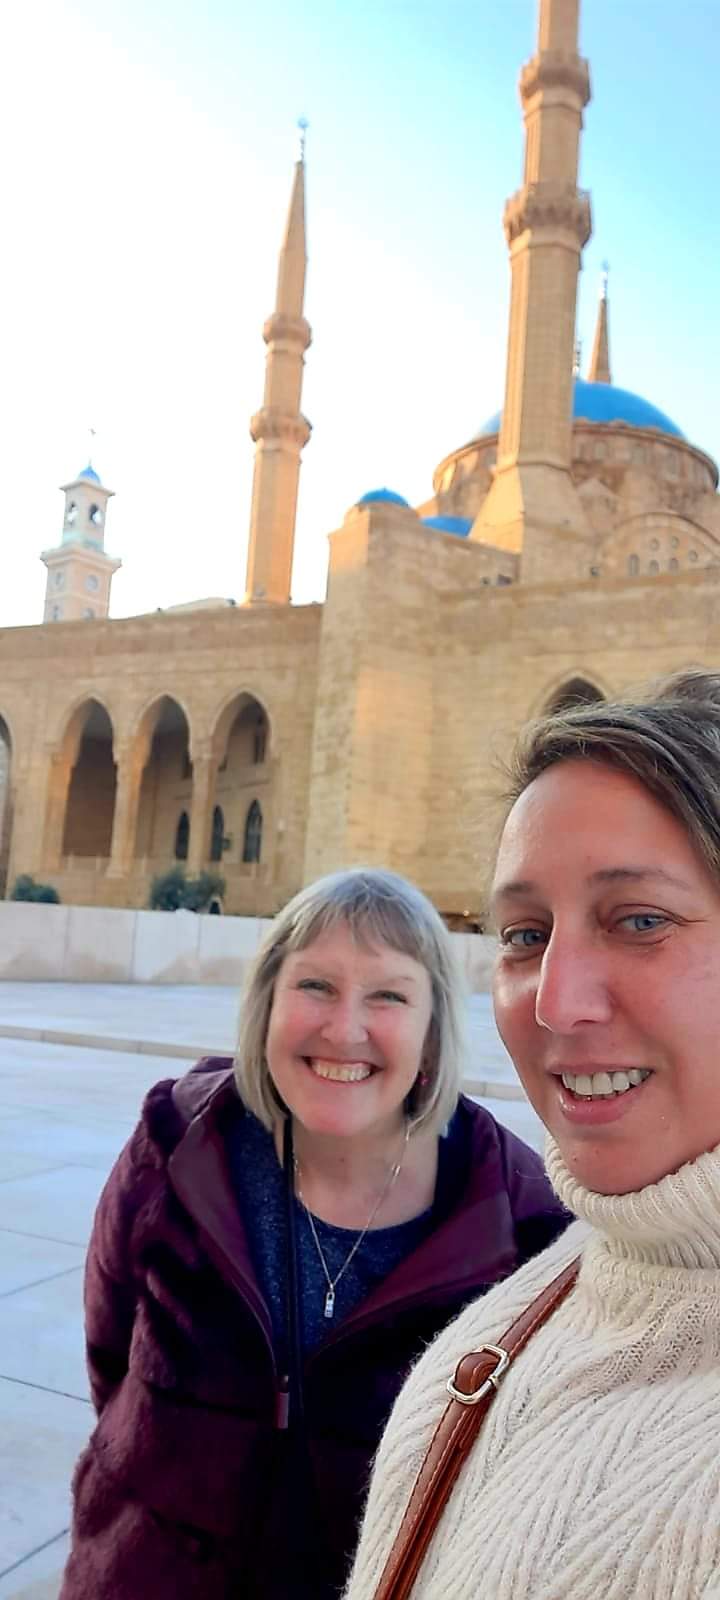 Me and my guide outside Beirut mosque